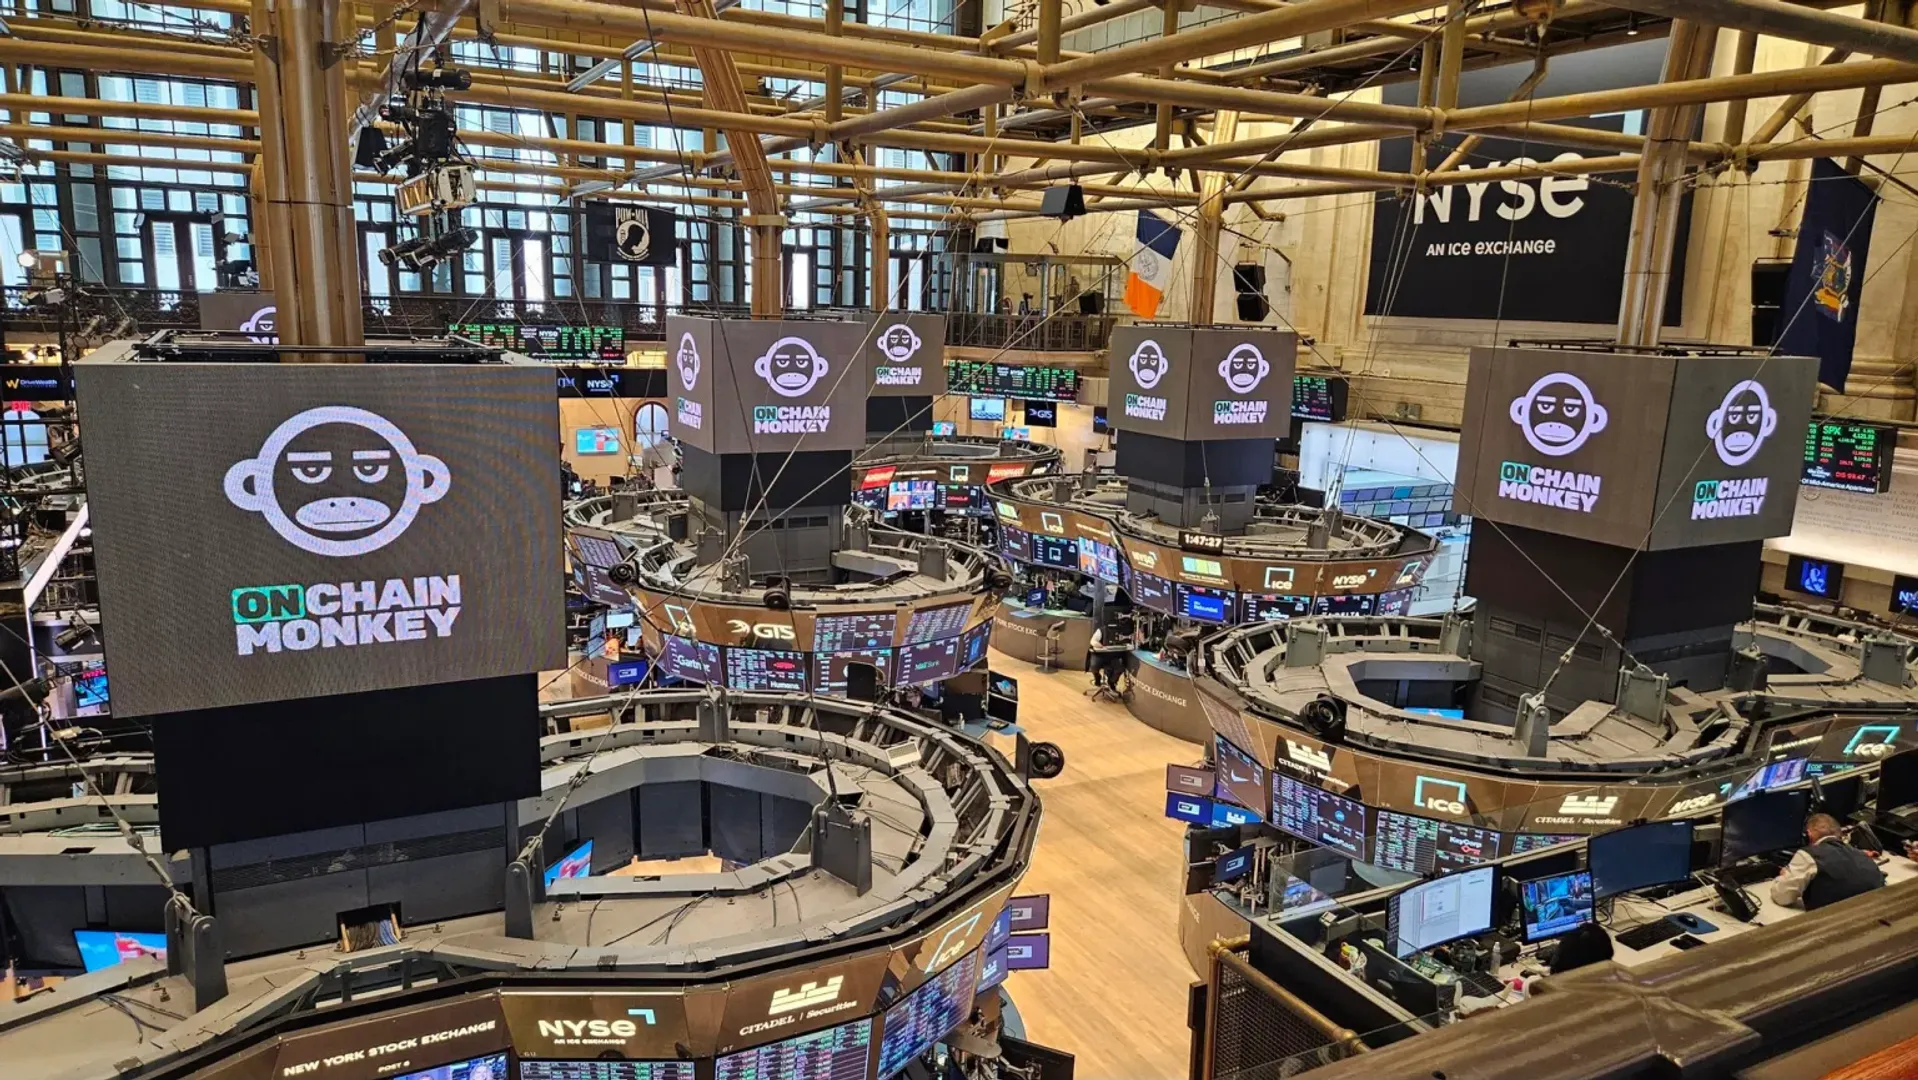 Maybe it's just me but I think we need more monkeys on the floor of the New York Stock Exchange 😁  

Full story here https://news.onchainmonkey.com/2023/04/24/nft-thought-leaders-and-a-party-on-the-nyse-floor-make-nft-nyc-2023-unforgettable/

Why I'm here...

OnChainMonkey
https://onchainmonkey.com

MetaGood
https://metagood.com